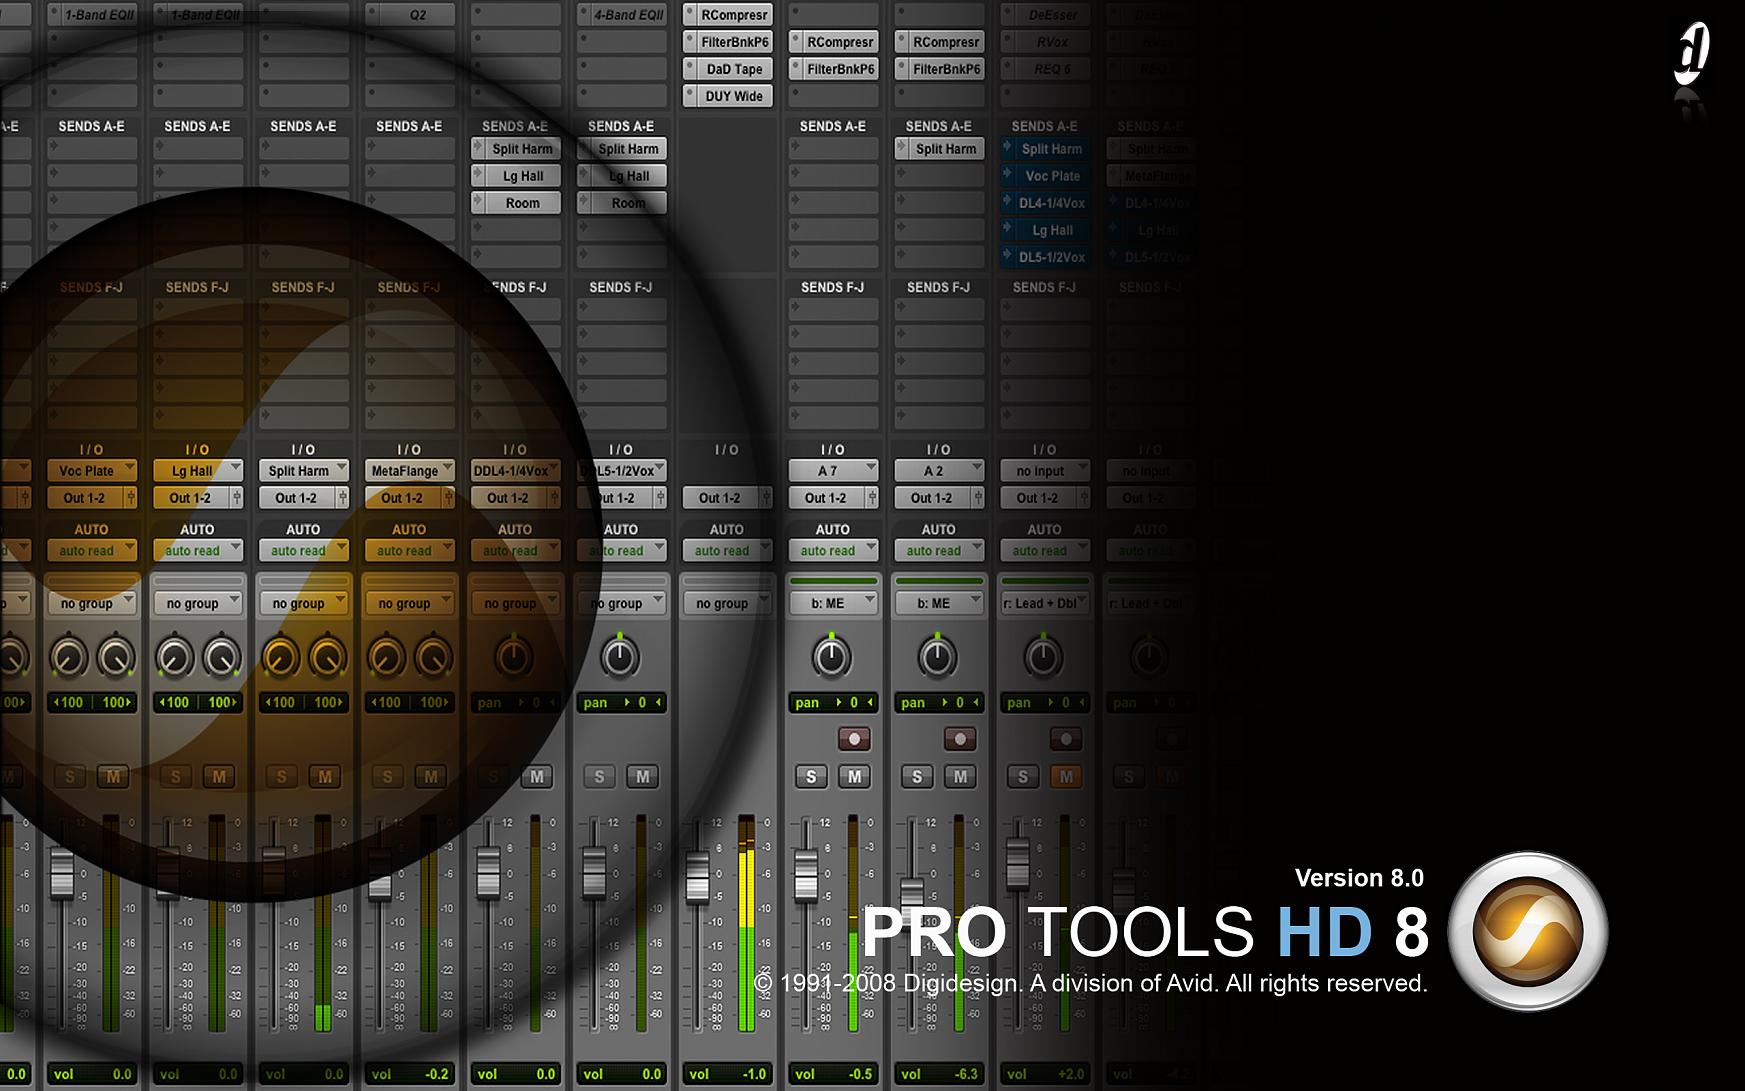 Pro tools 8 free. download full version for mac download